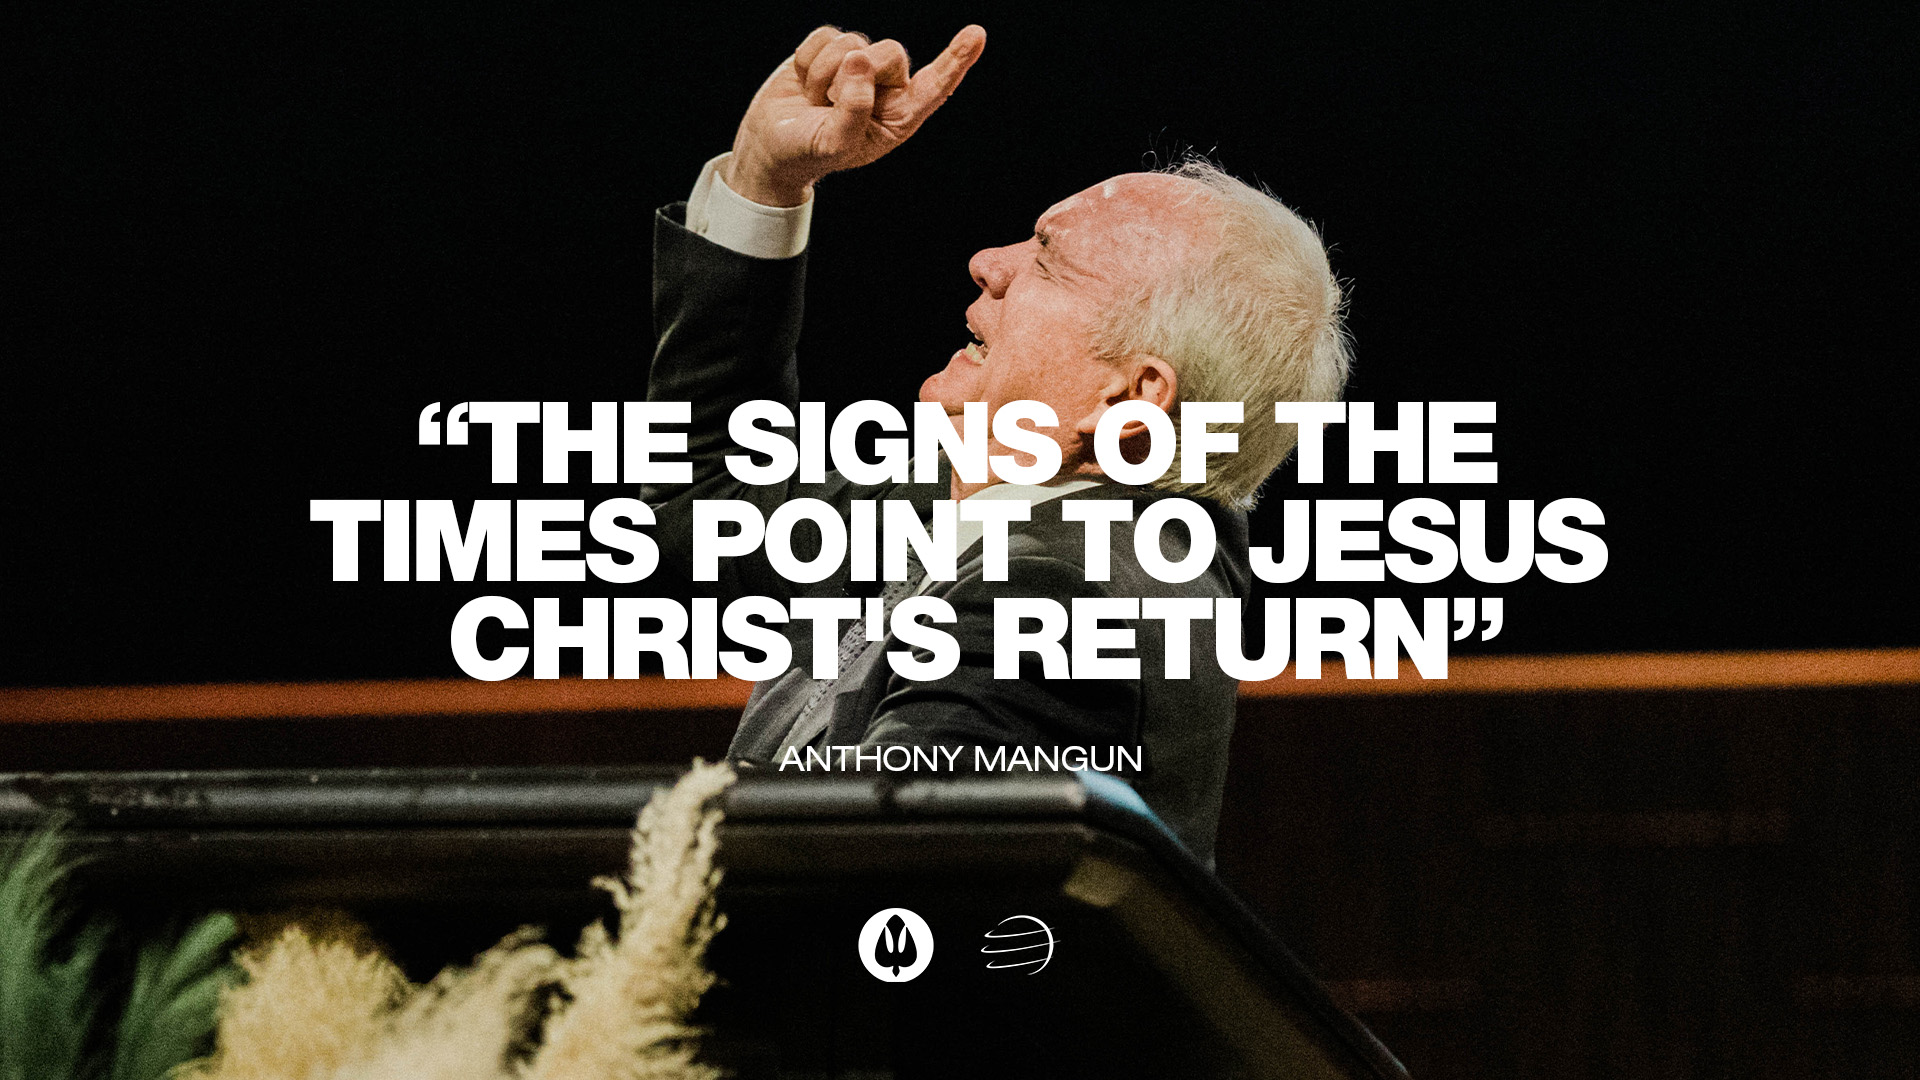 The Signs of the Times Point to Jesus Christs Return